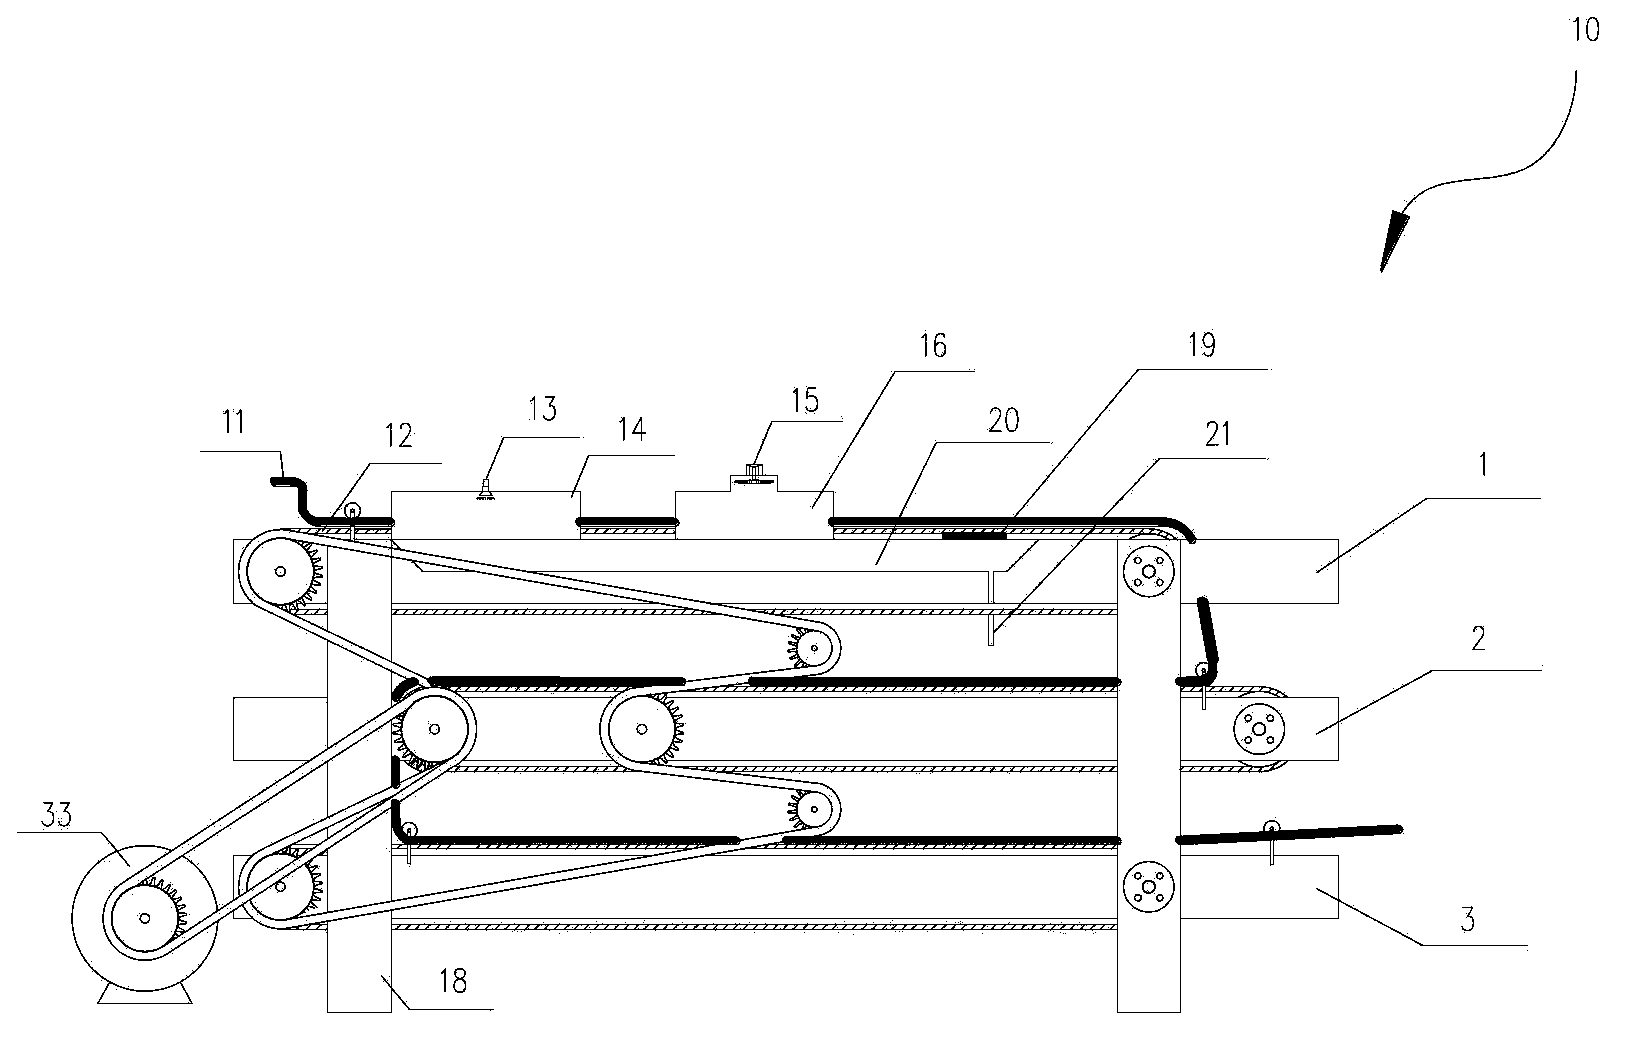 Extruded plastic cooling device